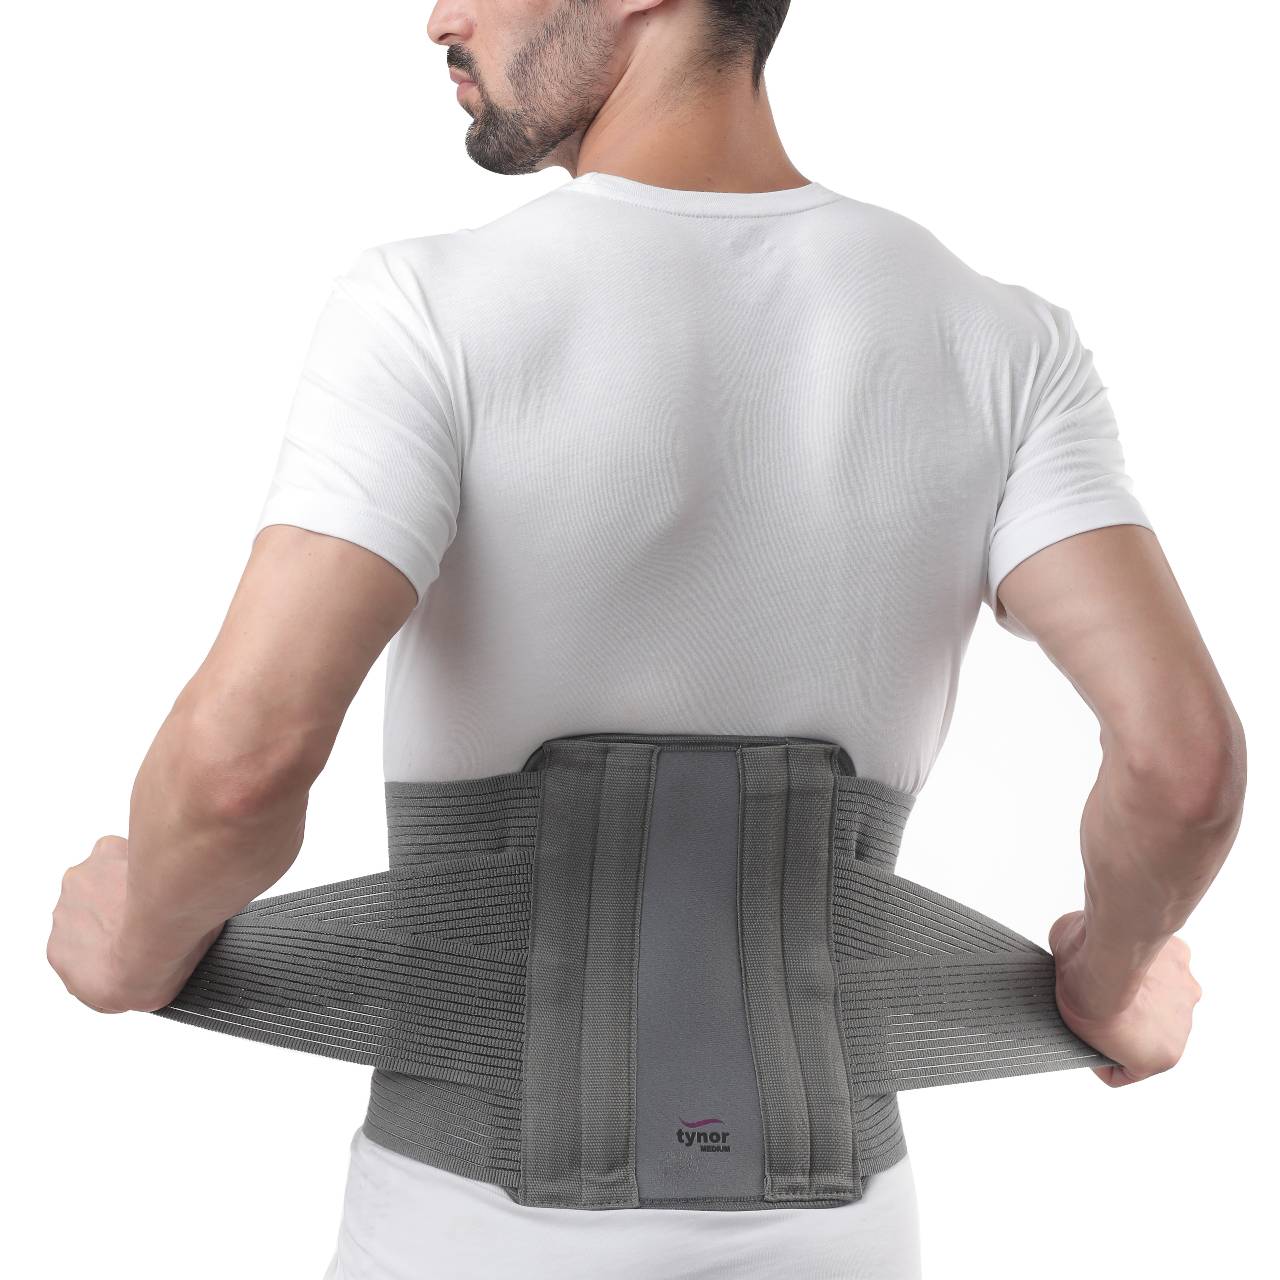 TYNOR CONTOURED L.S. SUPPORT, GREY, 1 UNIT